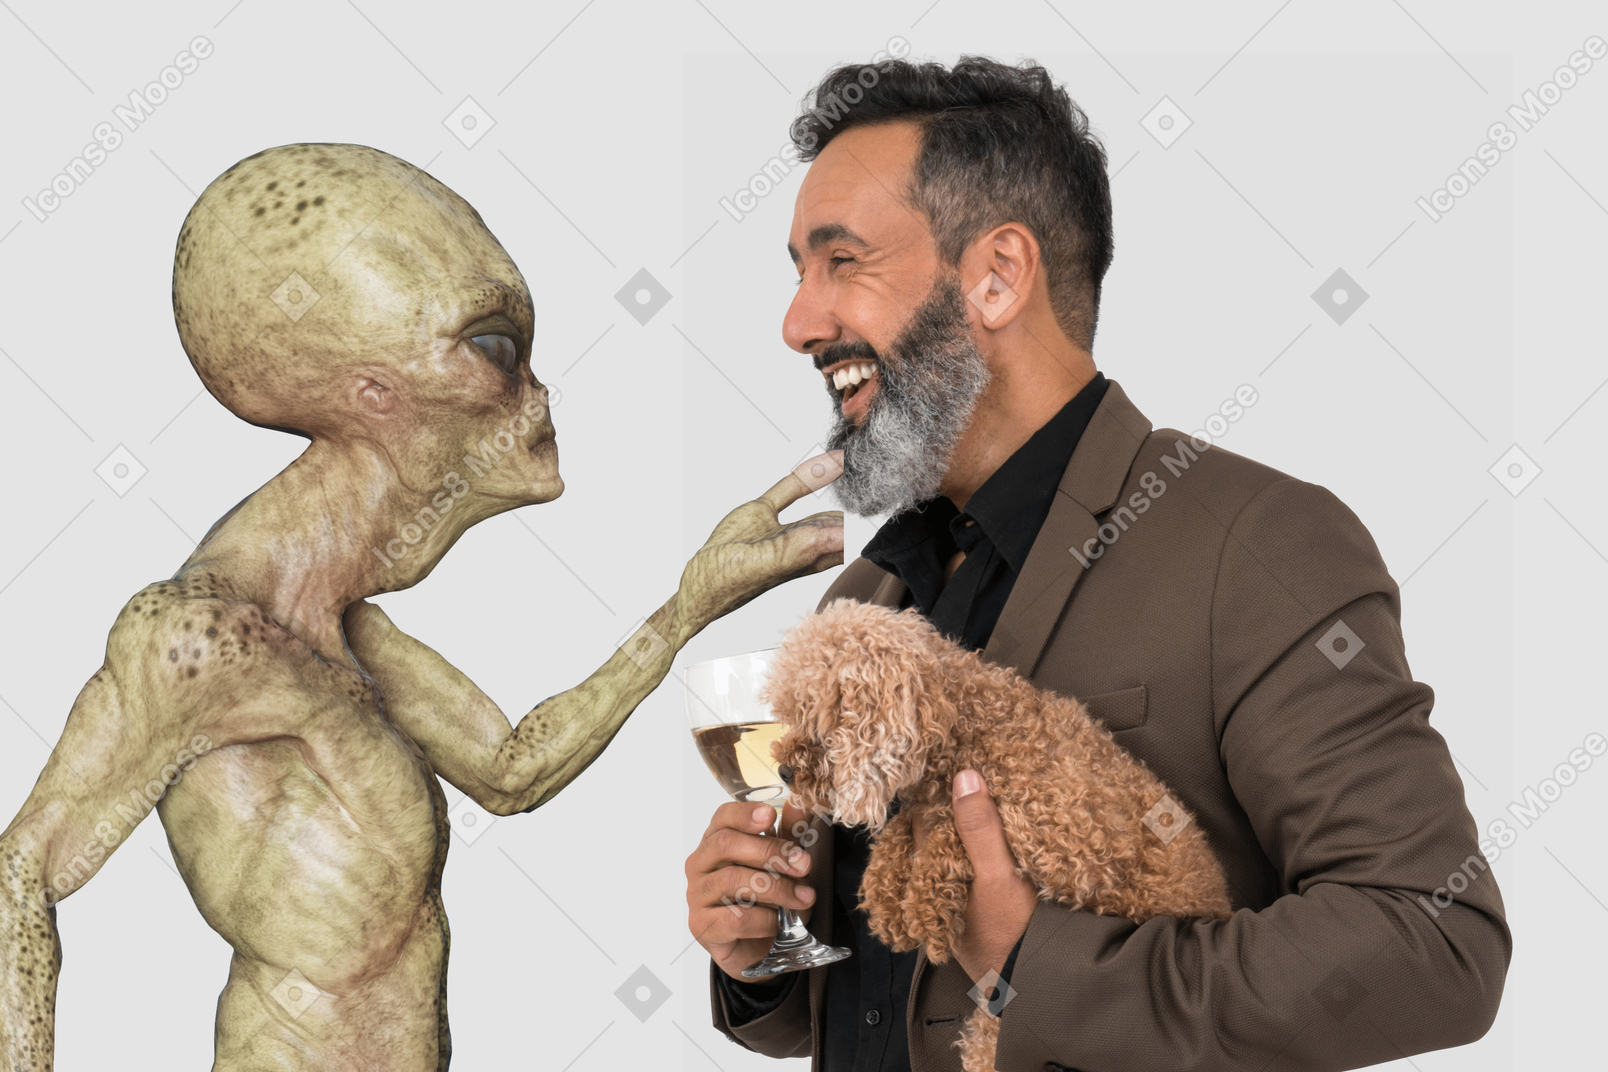 A man holding a wine glass and a dog in front of an alien